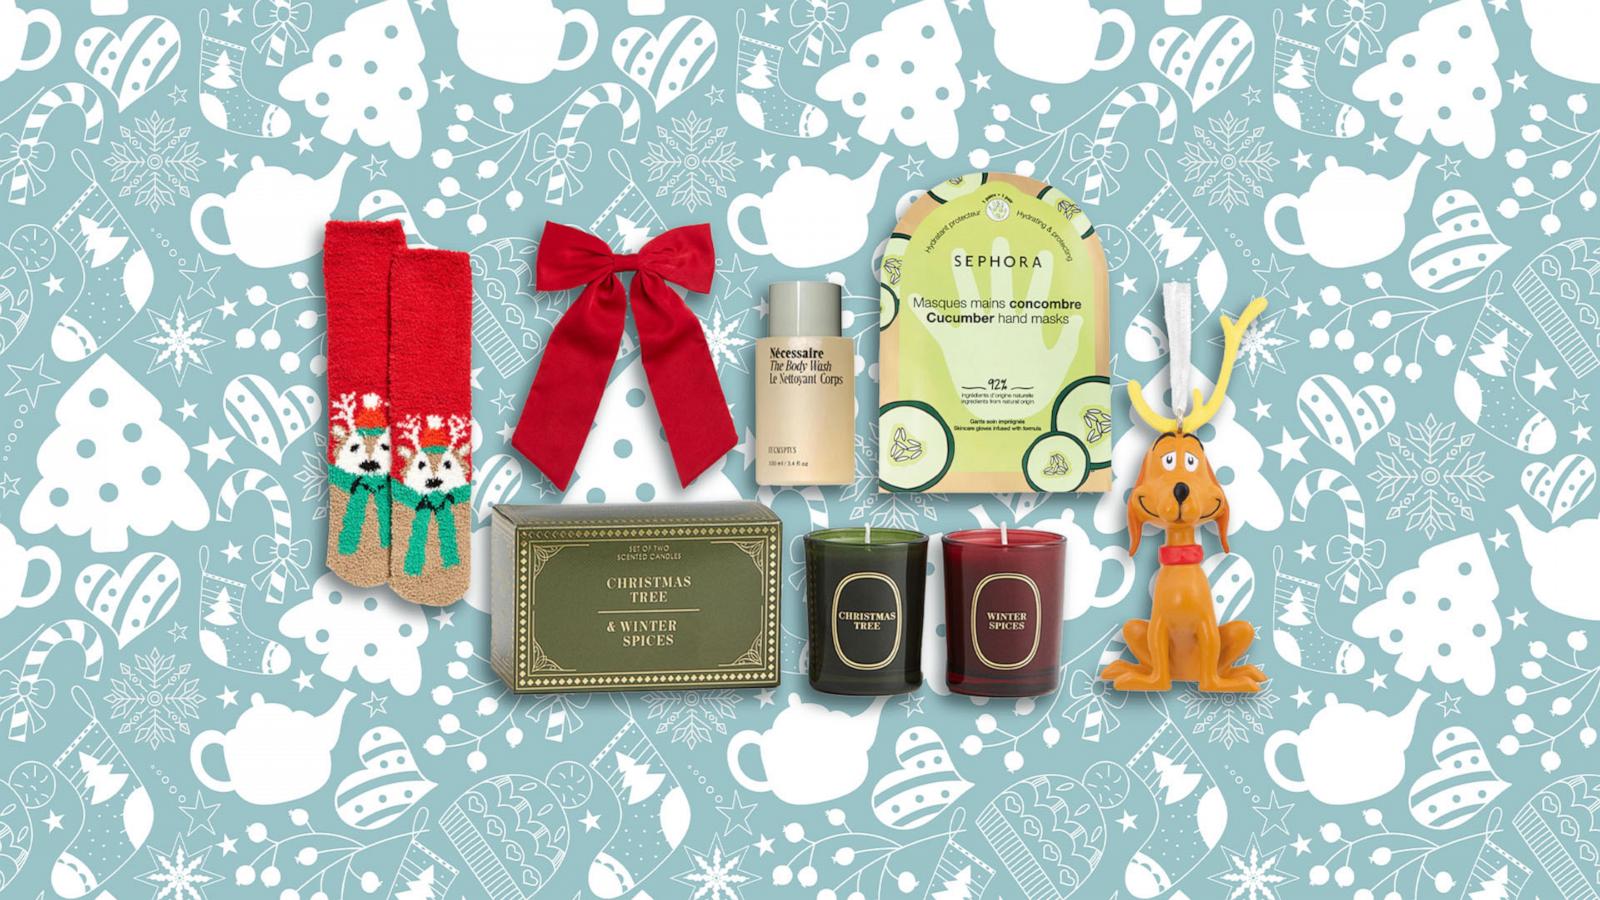 Safe to say anything Loccitane is a good stocking stuffer in my book. , stocking  stuffers